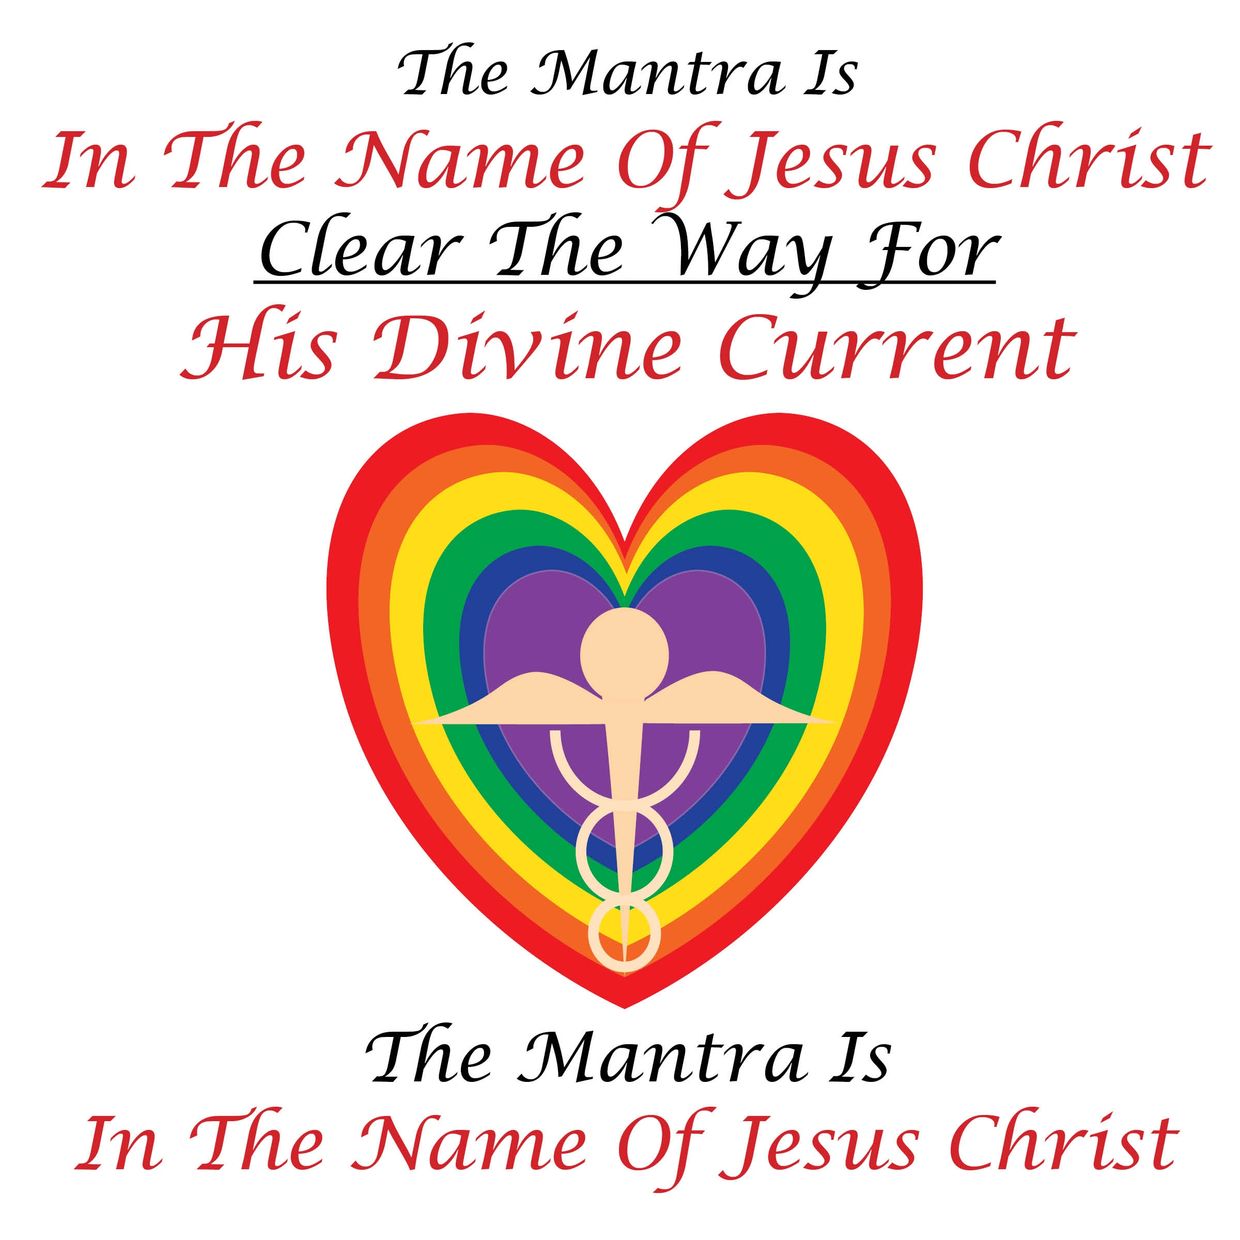 In The Name Of Jesus Christ 
 The Heart Color Spectrum
